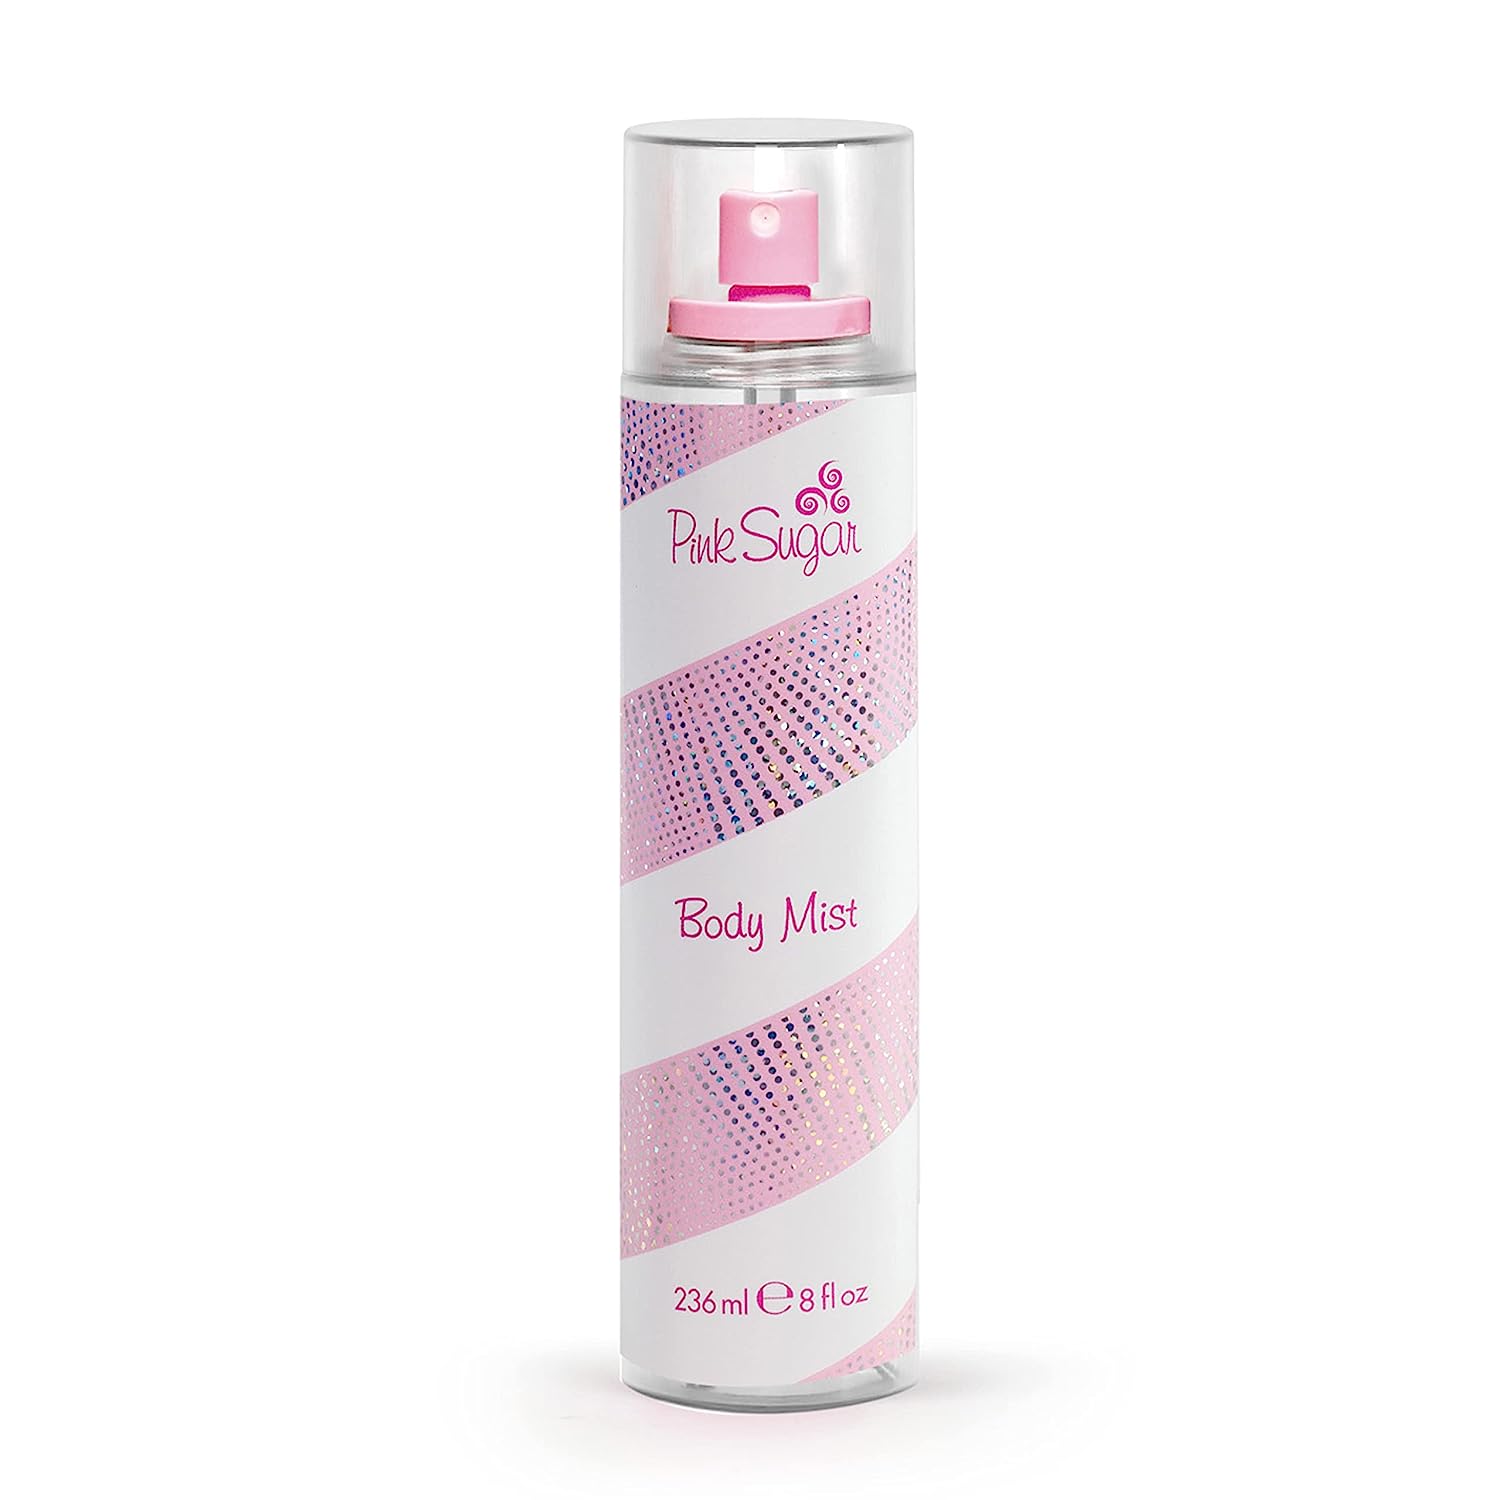 Pink Sugar Body Mist for Women, Perfume and Body [...]